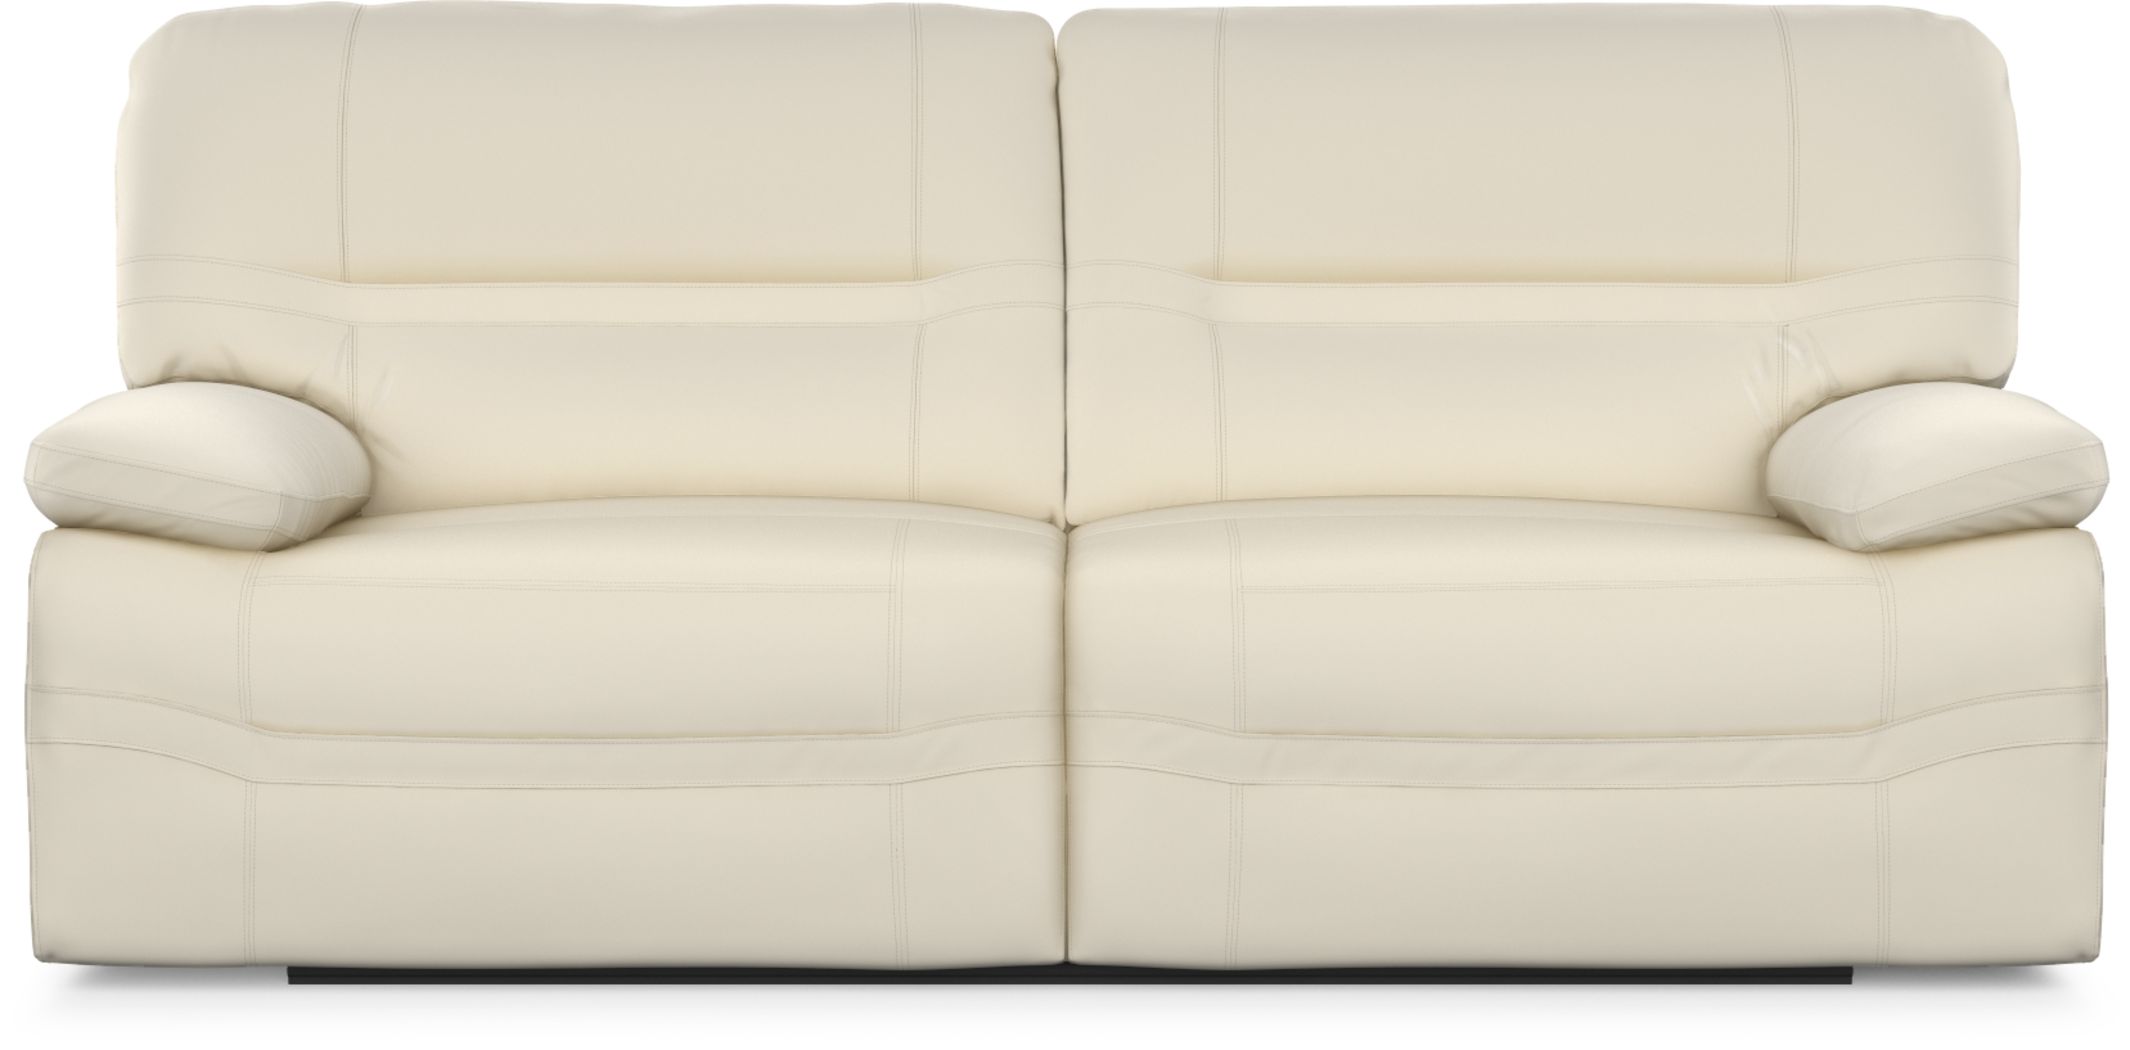 vernazza reclining leather sofa